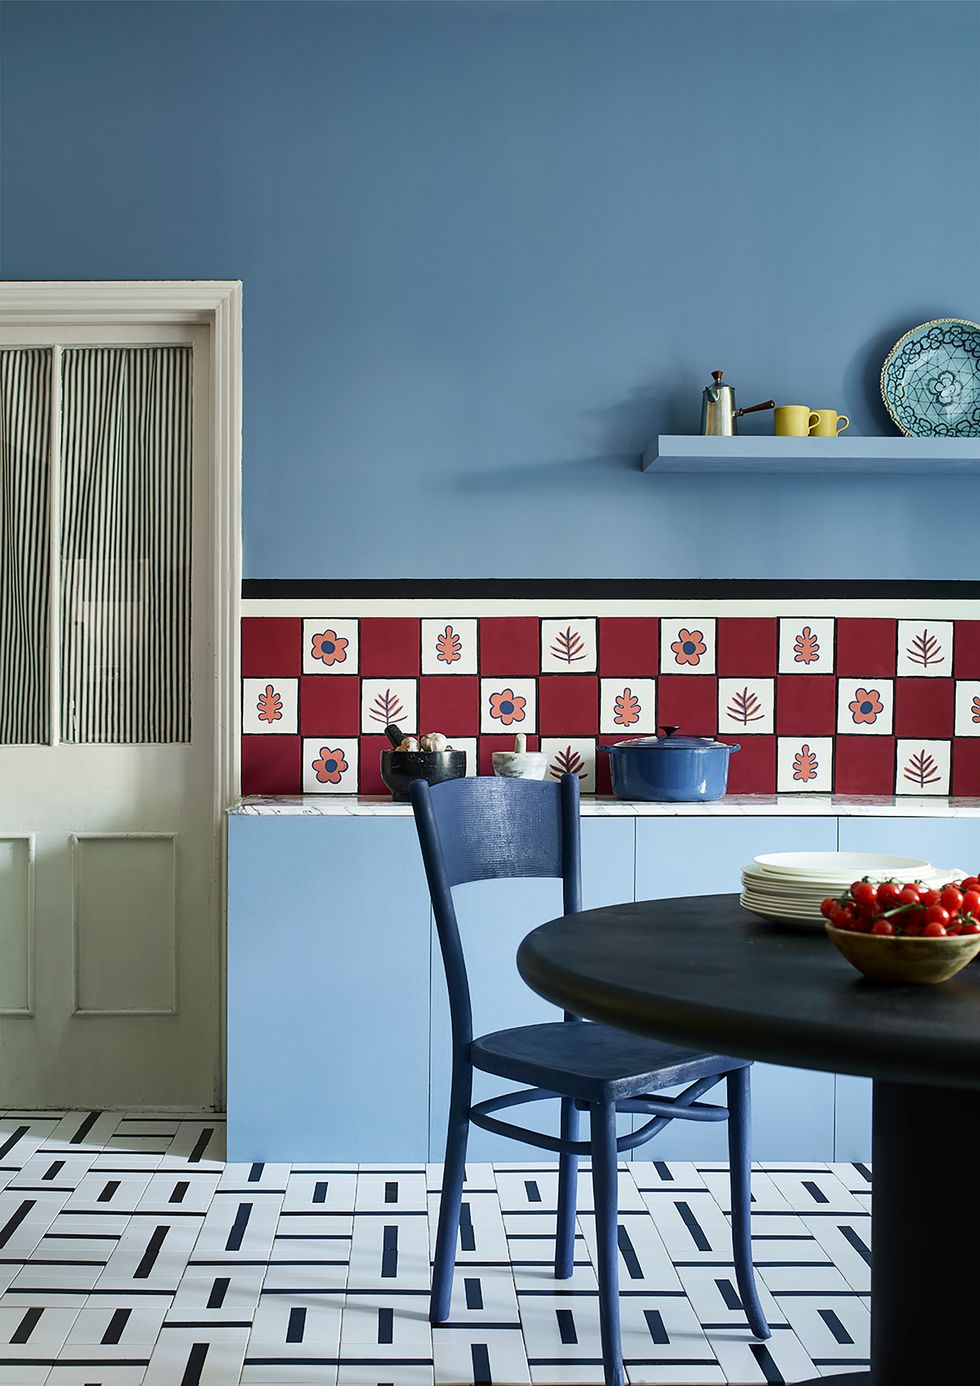 Classic 1950's style kitchen trend with blue geometric tile and light blue painted cabinets.